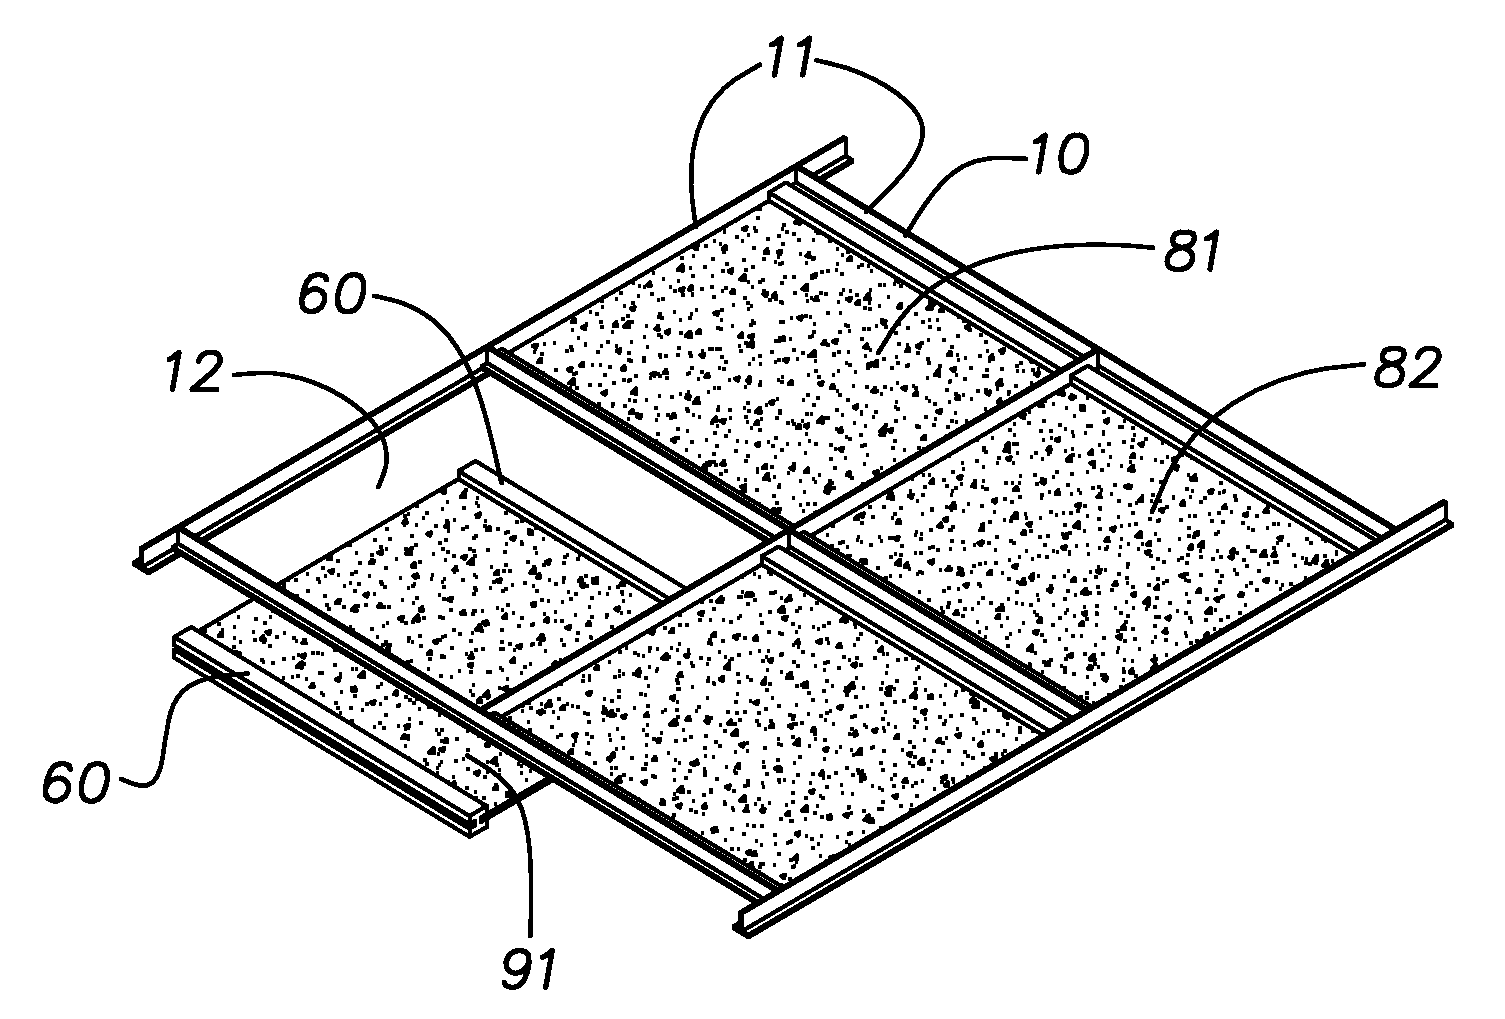 Apparatus, system, and method for facilitating use of thin flexible scrims in a grid-type suspended ceiling